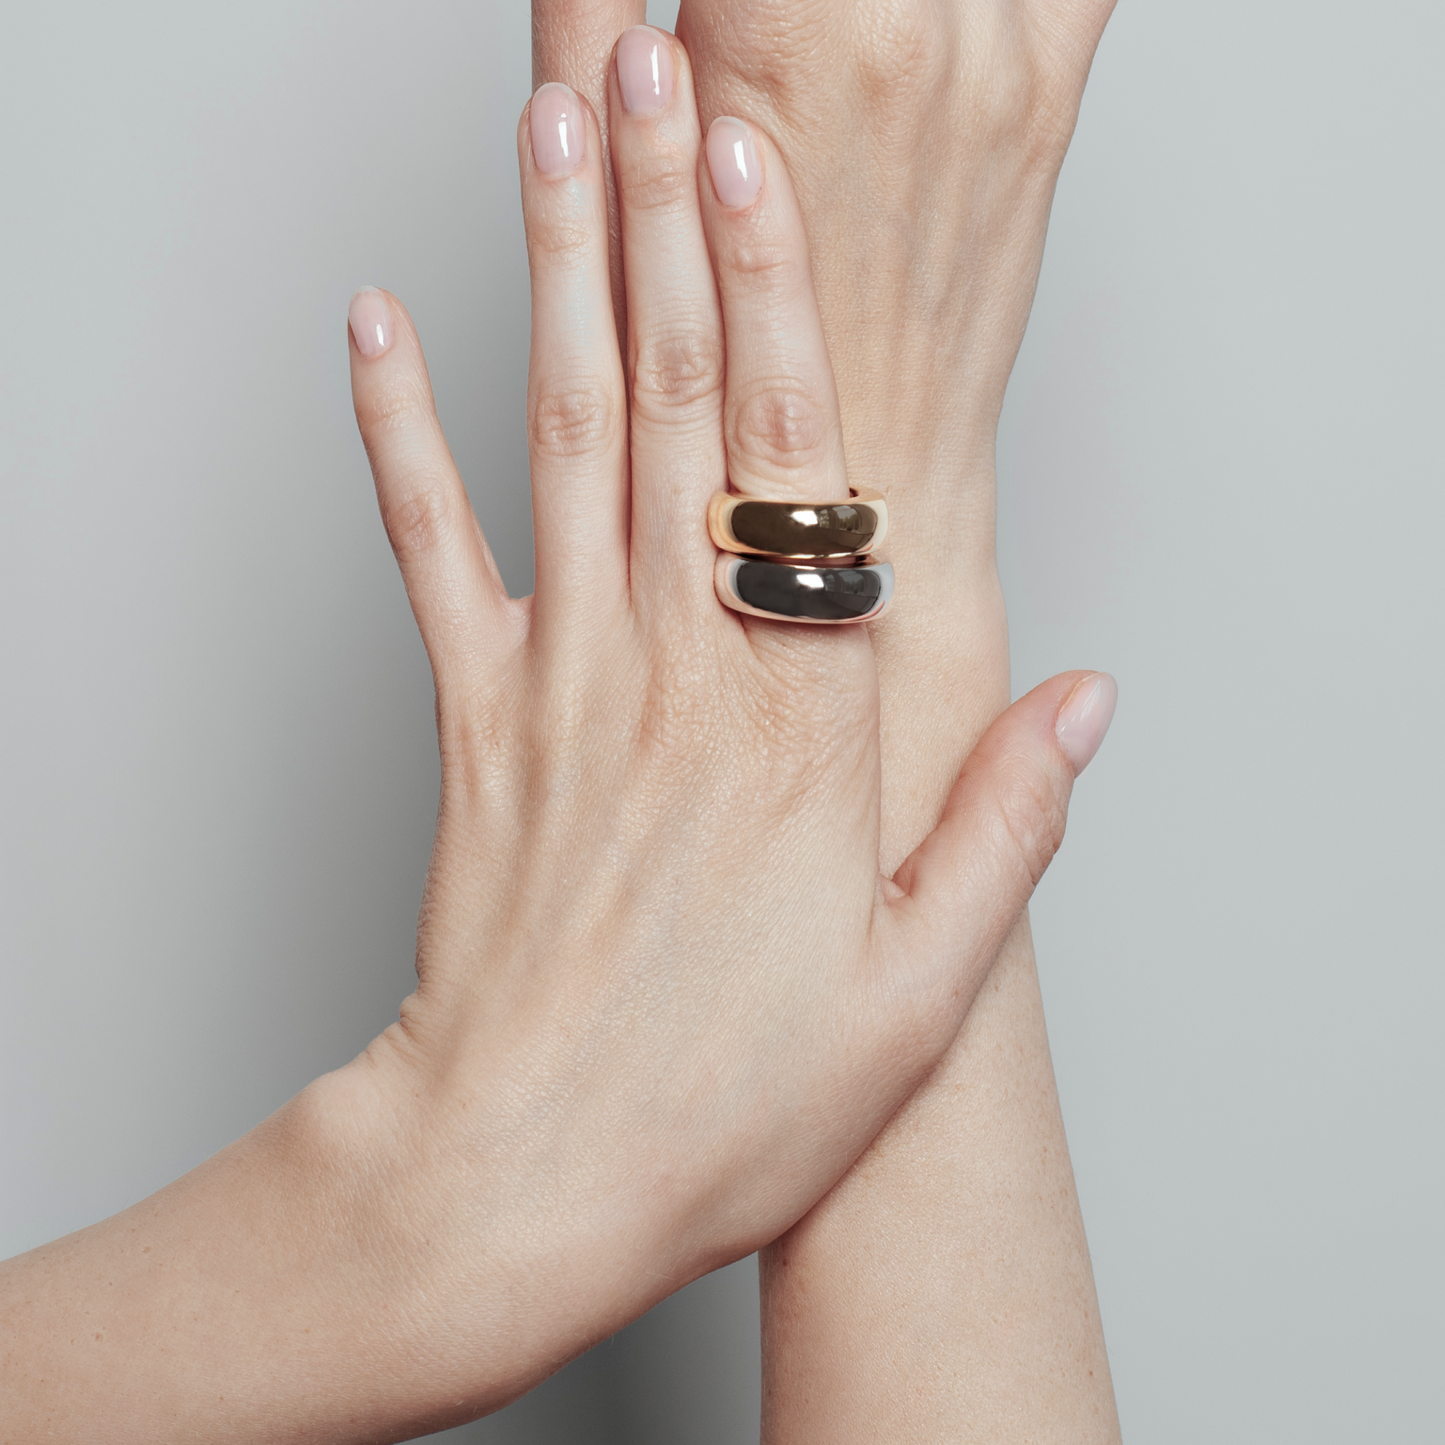 Cuff the Ring in gold